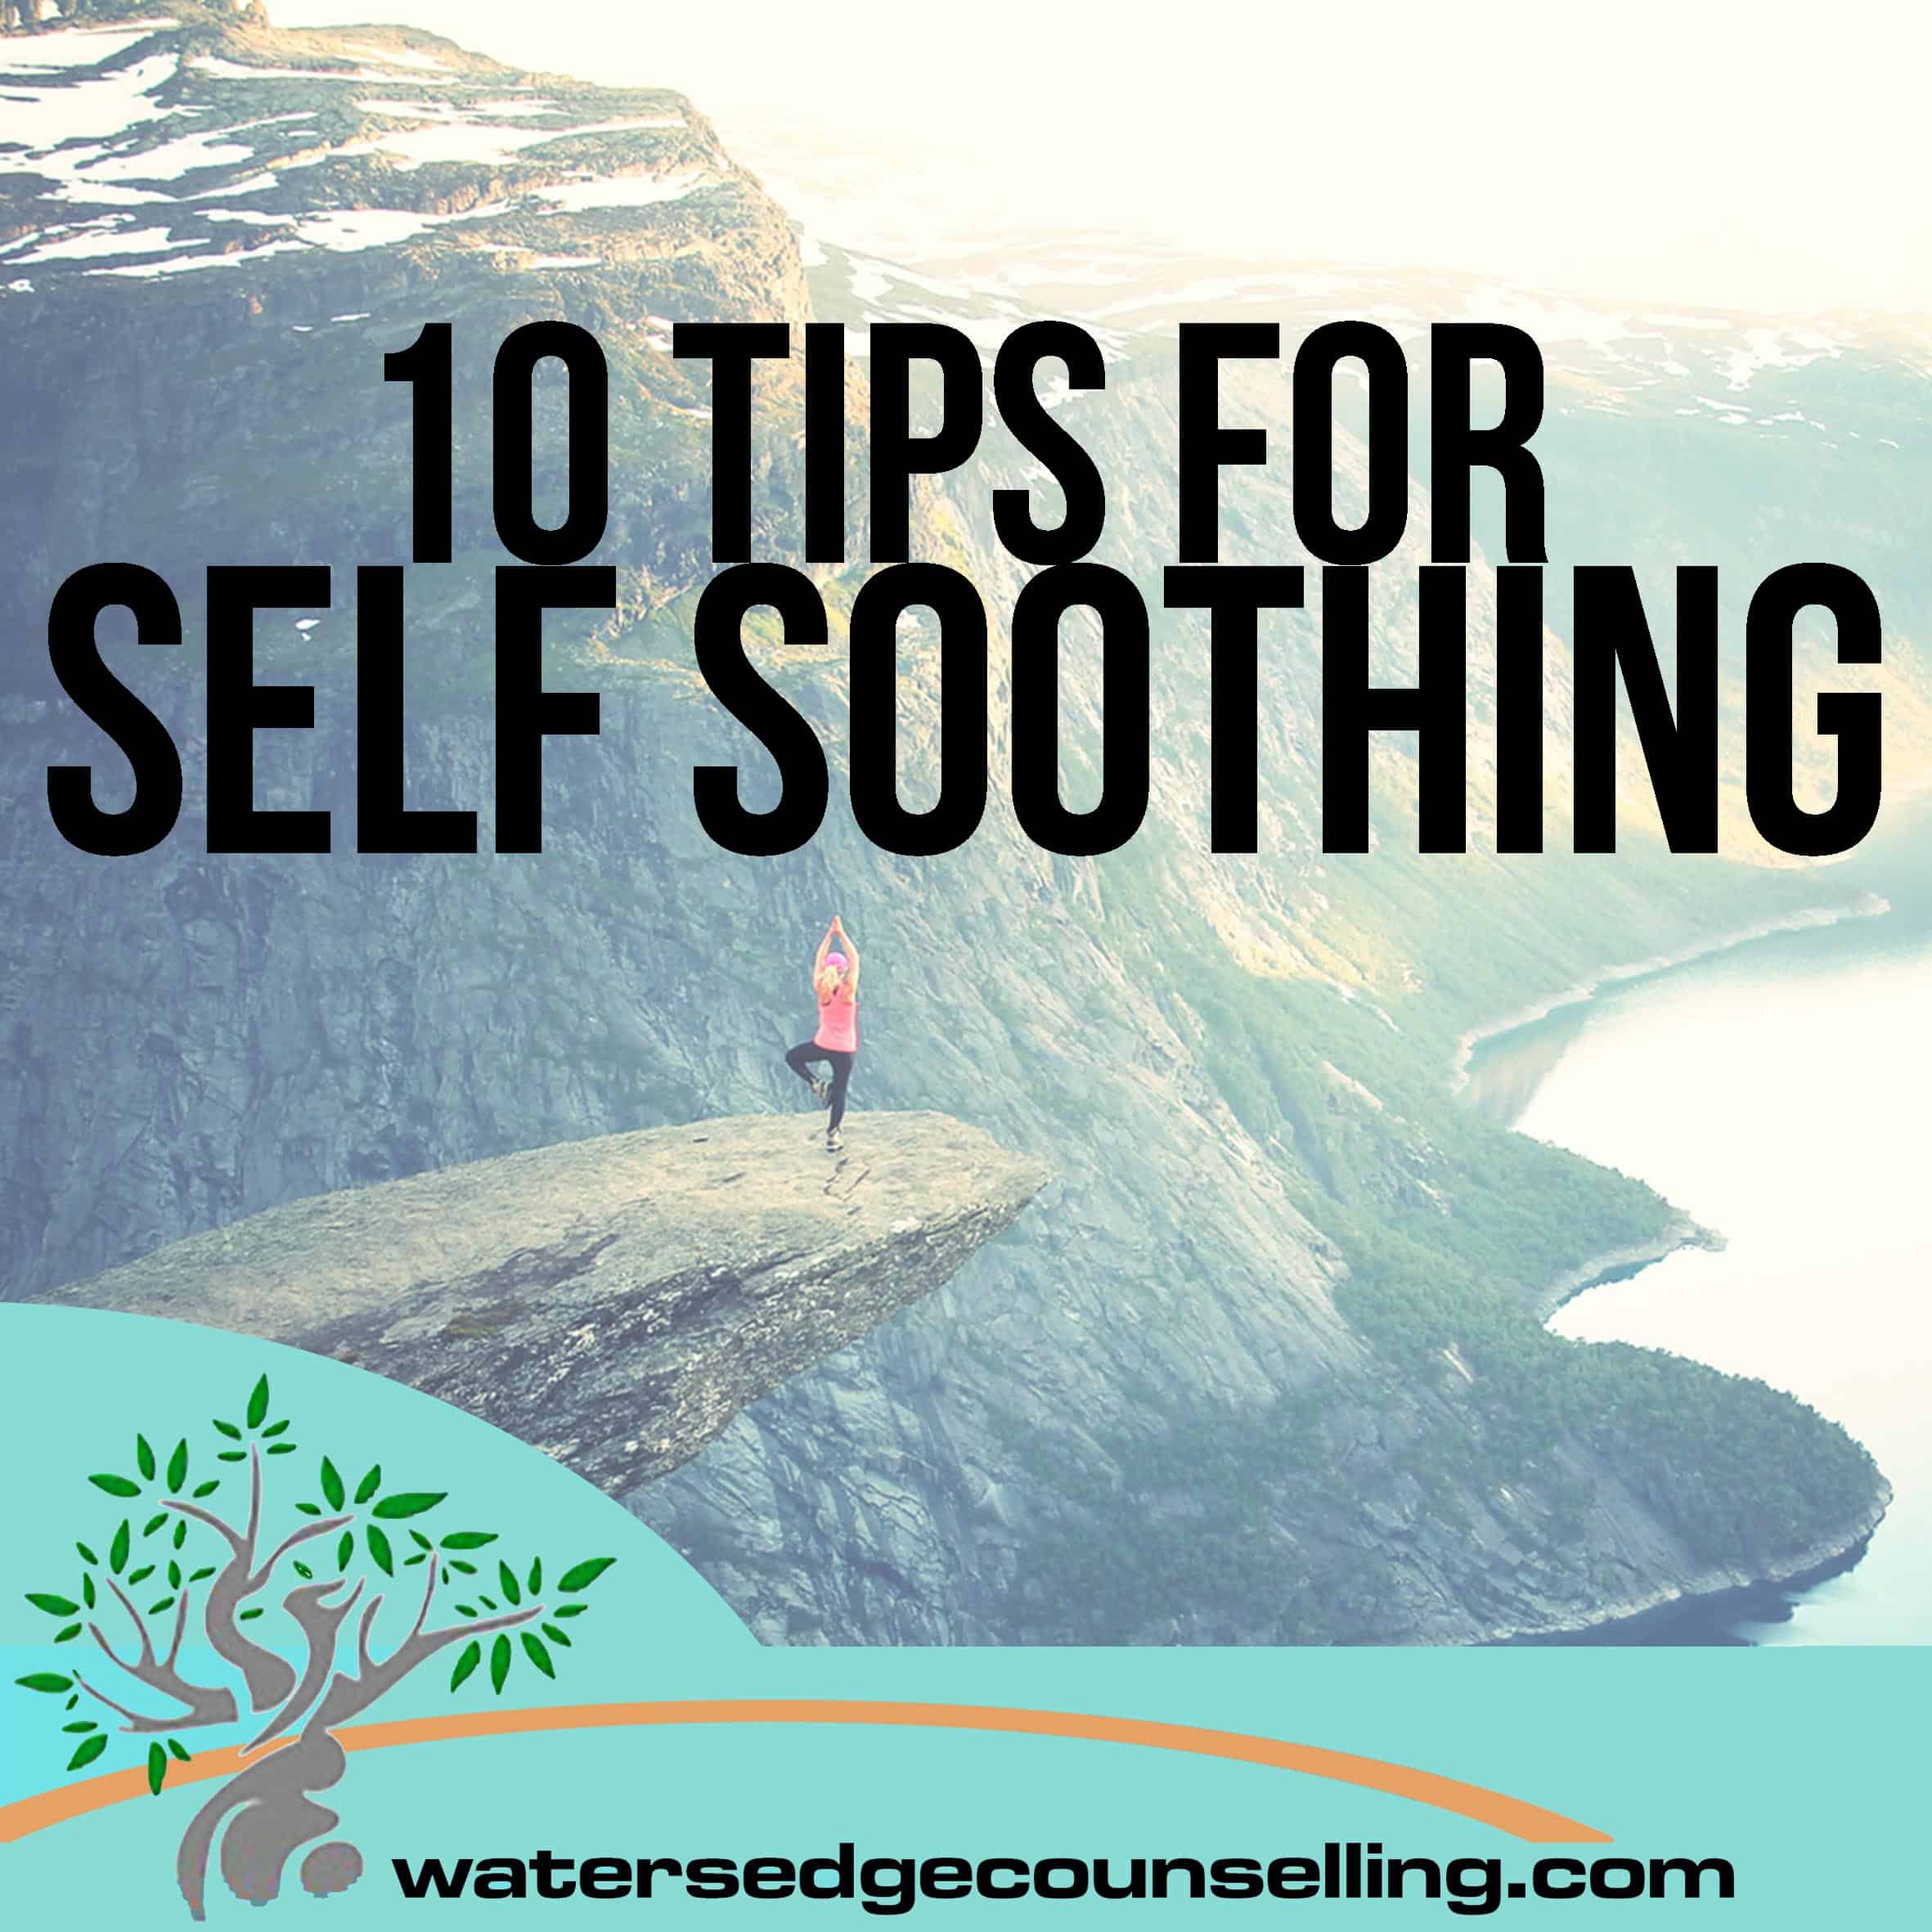 10 Tips for Self Soothing